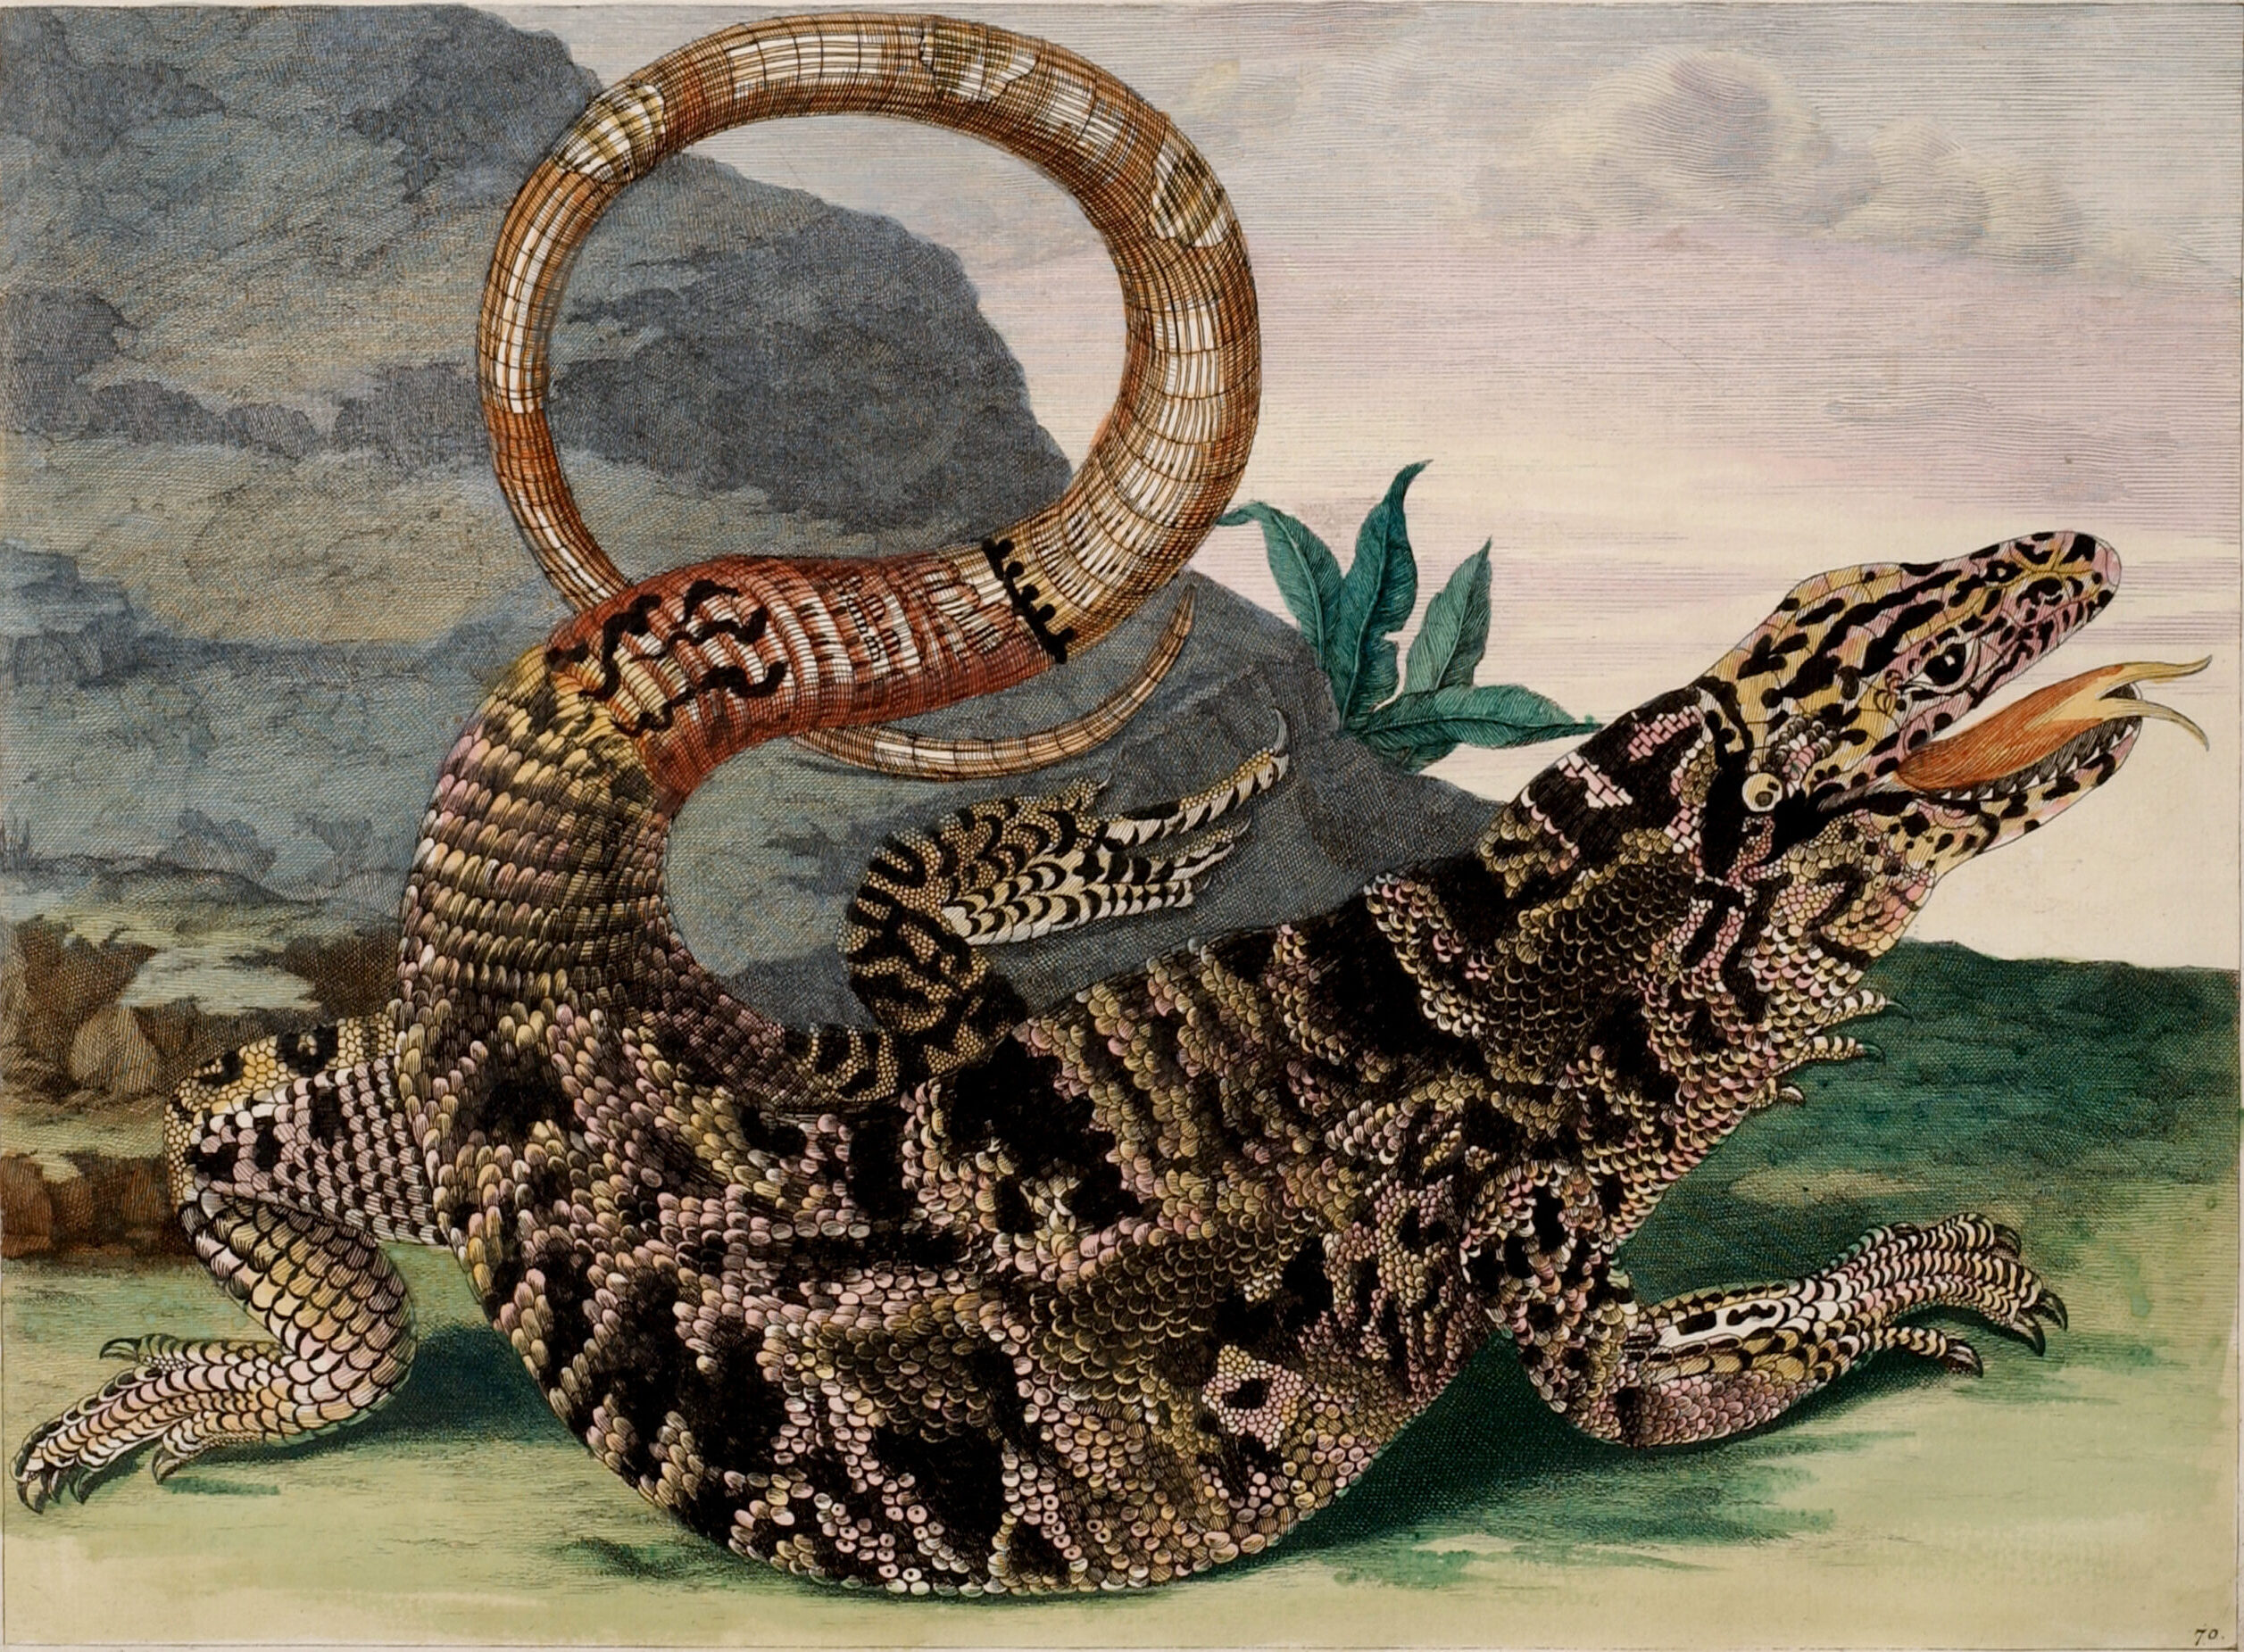 A detailed engraving portrays a large, black and tan lizard in precise detail. Facing right and positioned in front of a gray rock, the reptile extends its red, forked tongue. The reptile curls its lengthy tail into an O-shape suspended decoratively above its scaly torso.